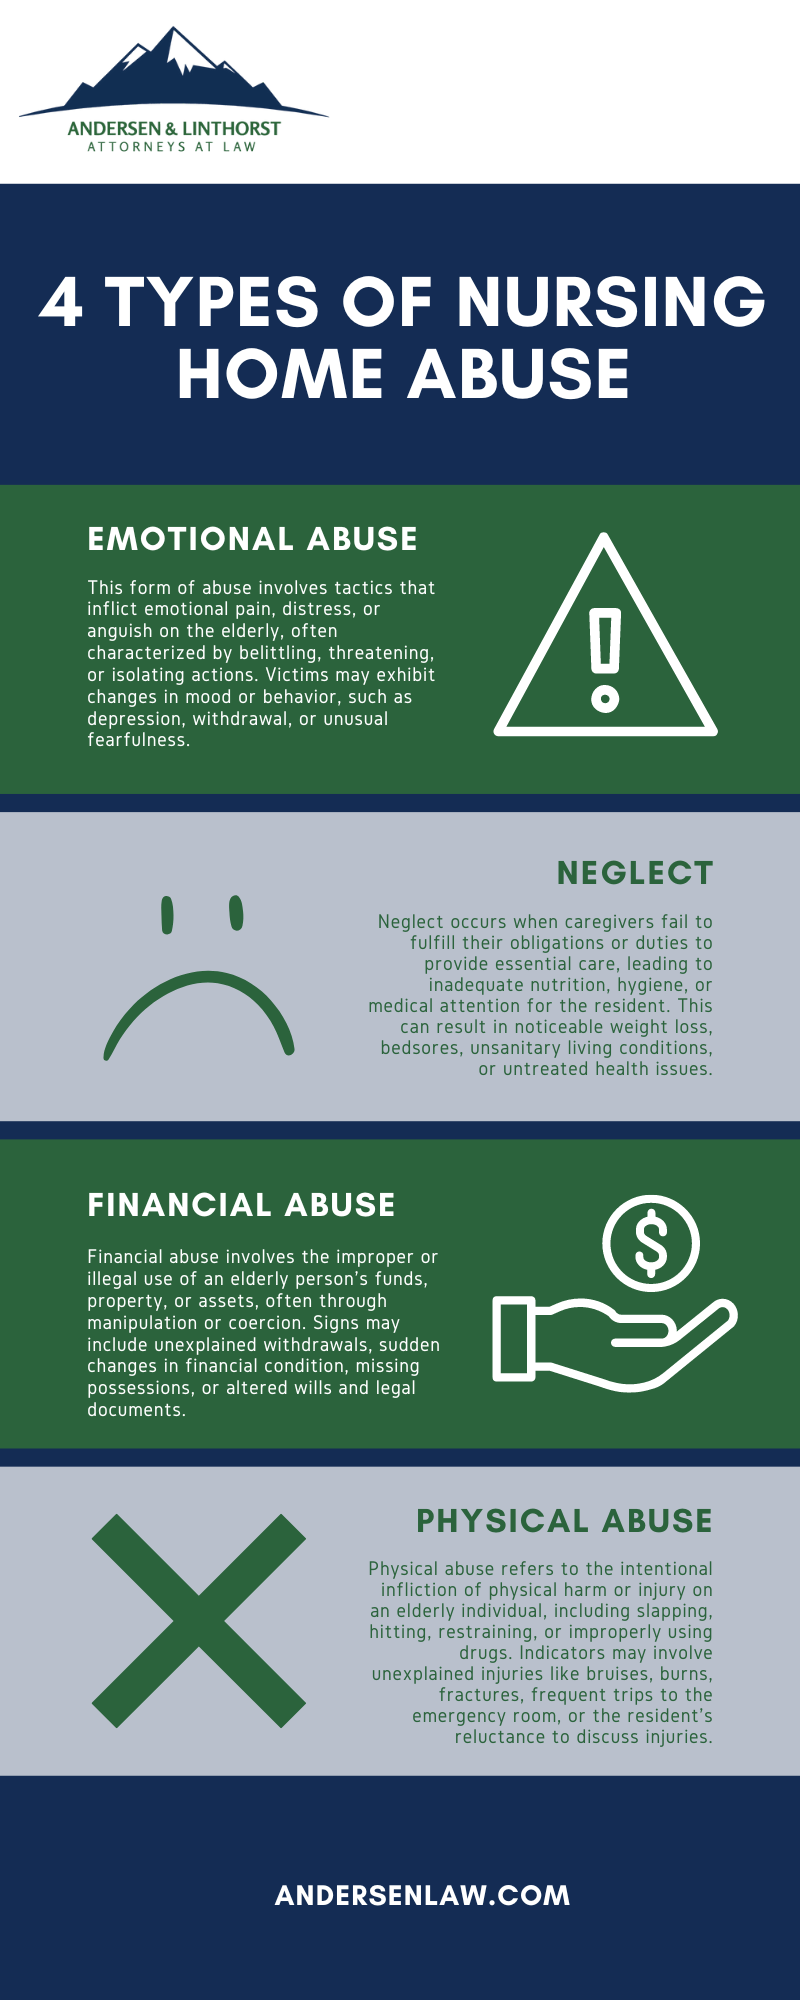 4 Types of Nursing Home Abuse Infographic